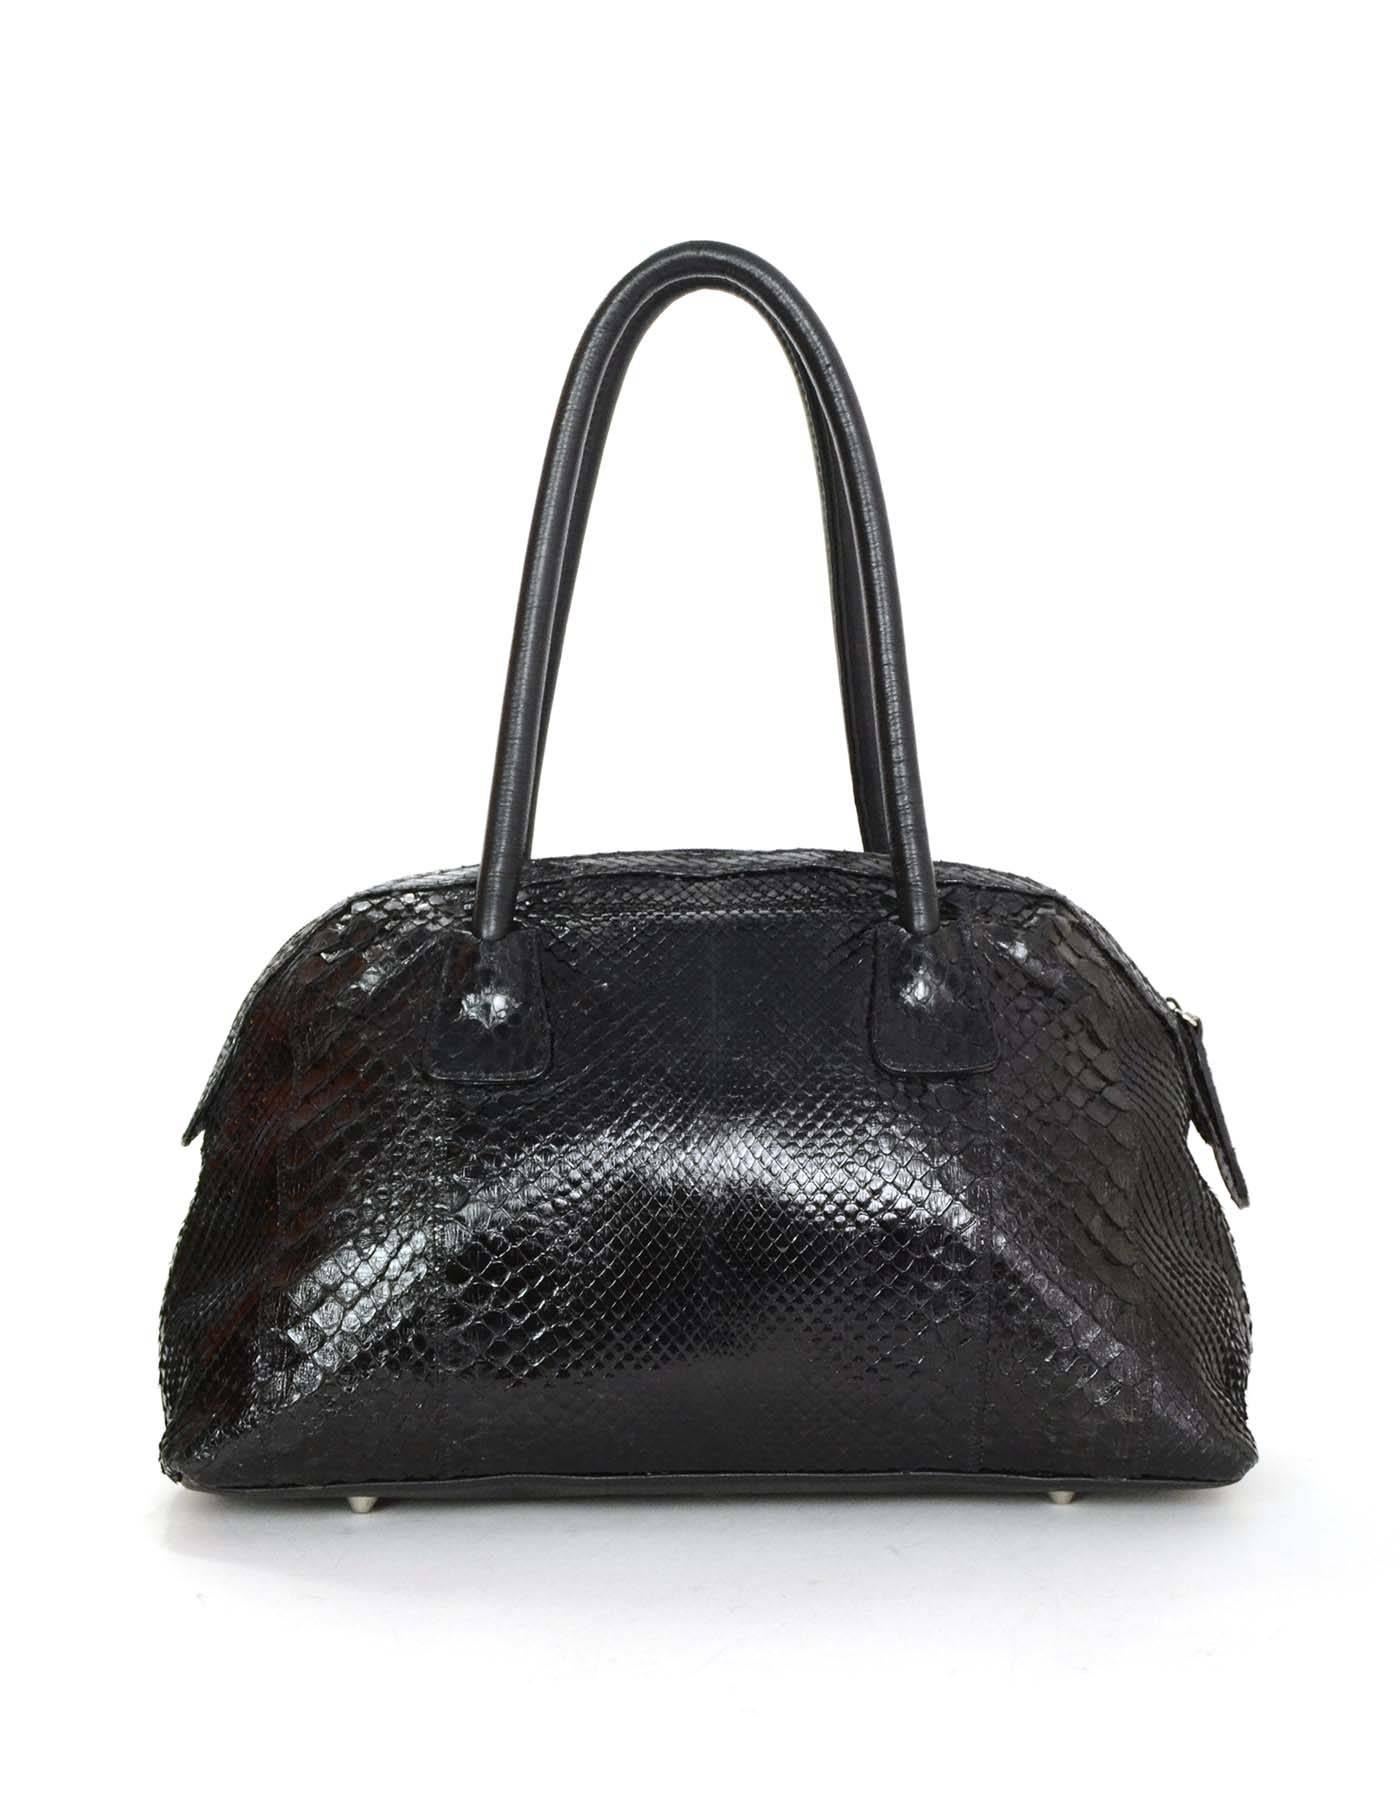 Features leather shoulder straps and zip top closure

    Color: Black
    Hardware: Silvertone
    Materials: Python and leather
    Lining: Multicolor printed textile
    Closure/Opening: Zip top
    Exterior Pockets: None
    Interior